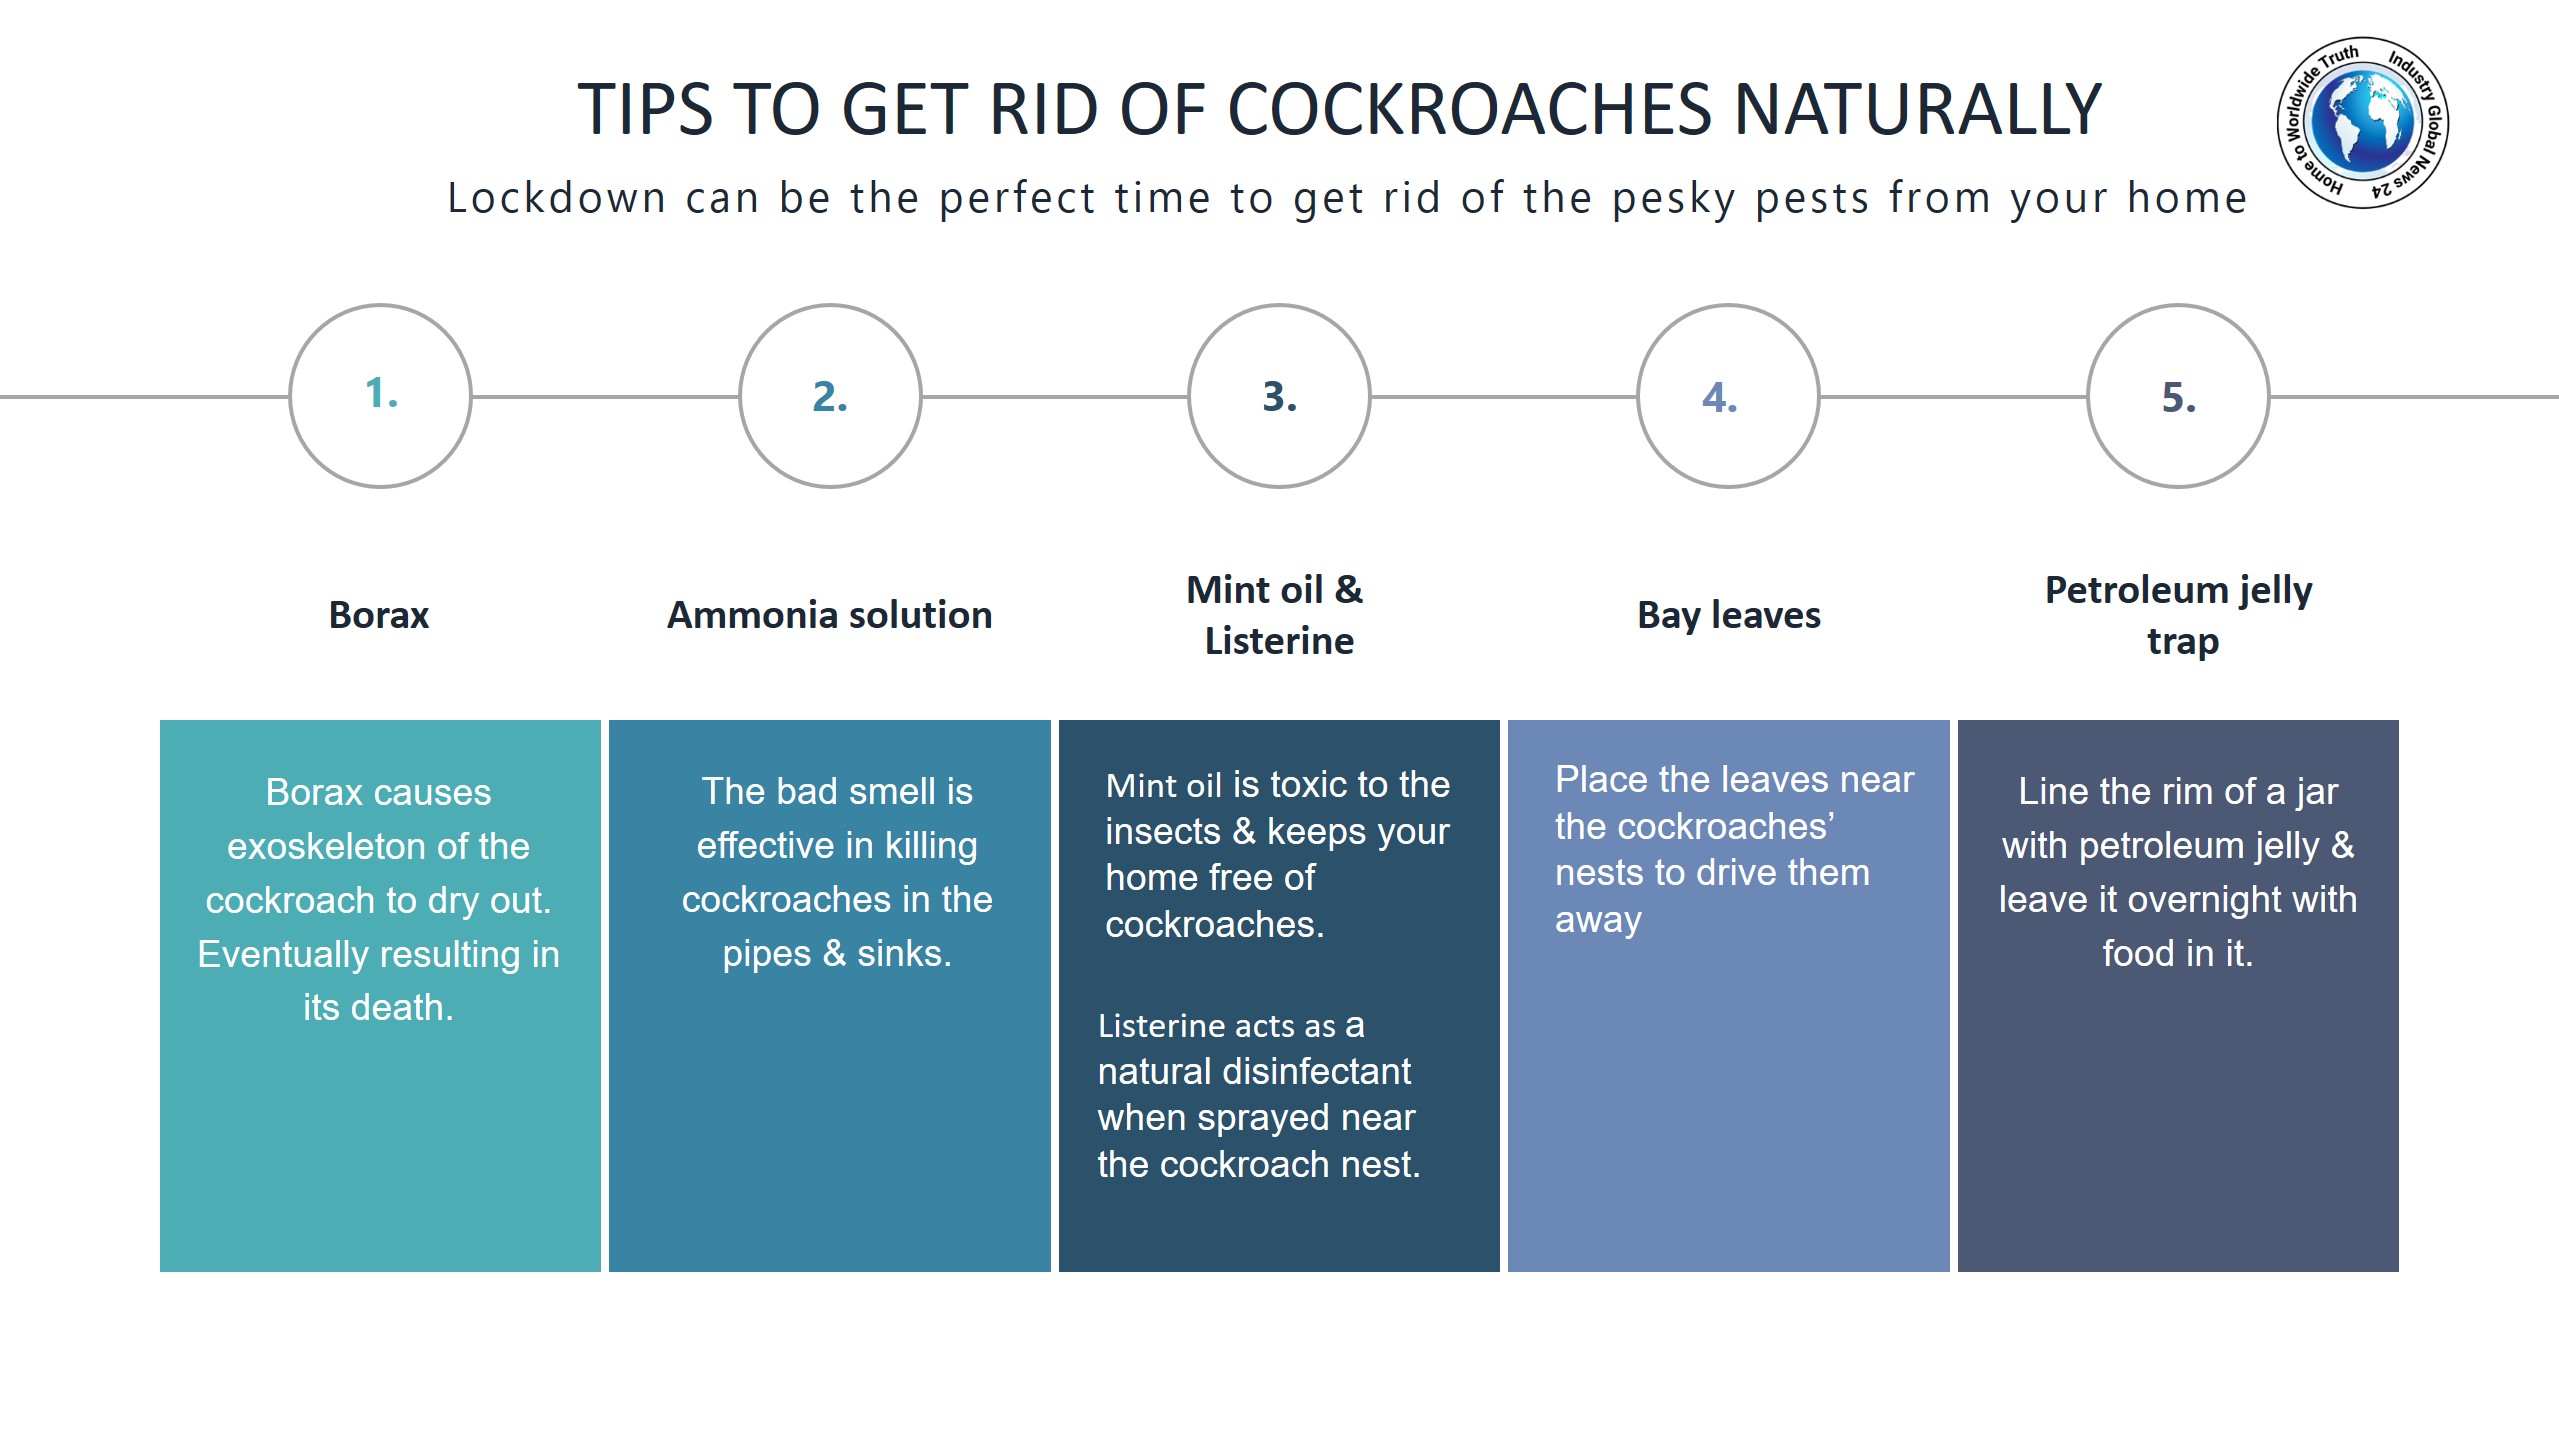 Tips to get rid of cockroaches naturally